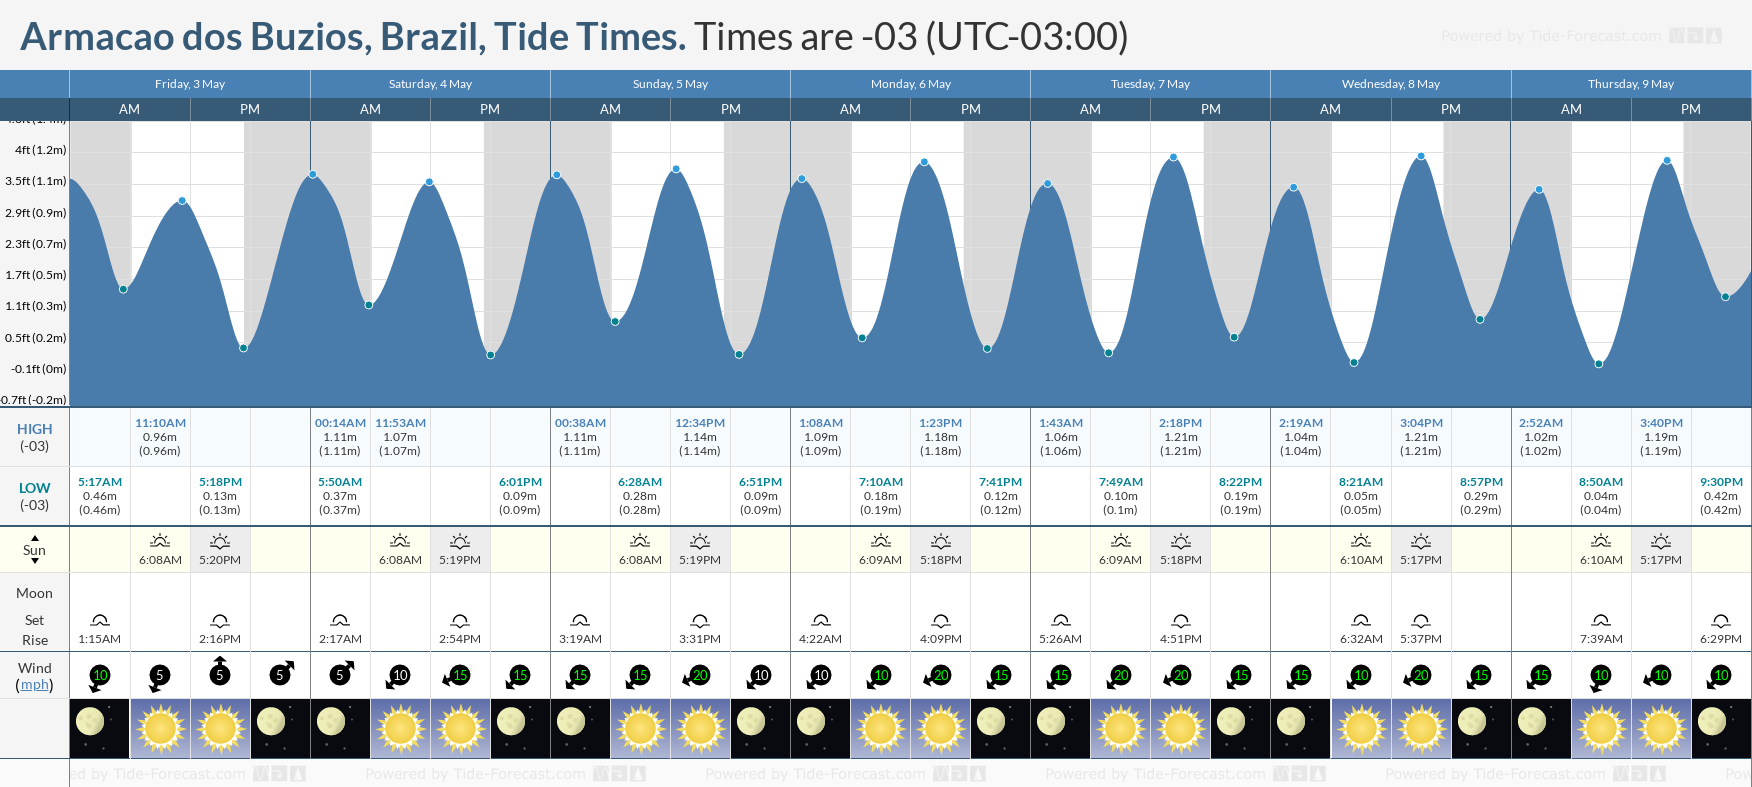 Armacao dos Buzios, Brazil Tide Chart including high and low tide tide times for the next 7 days